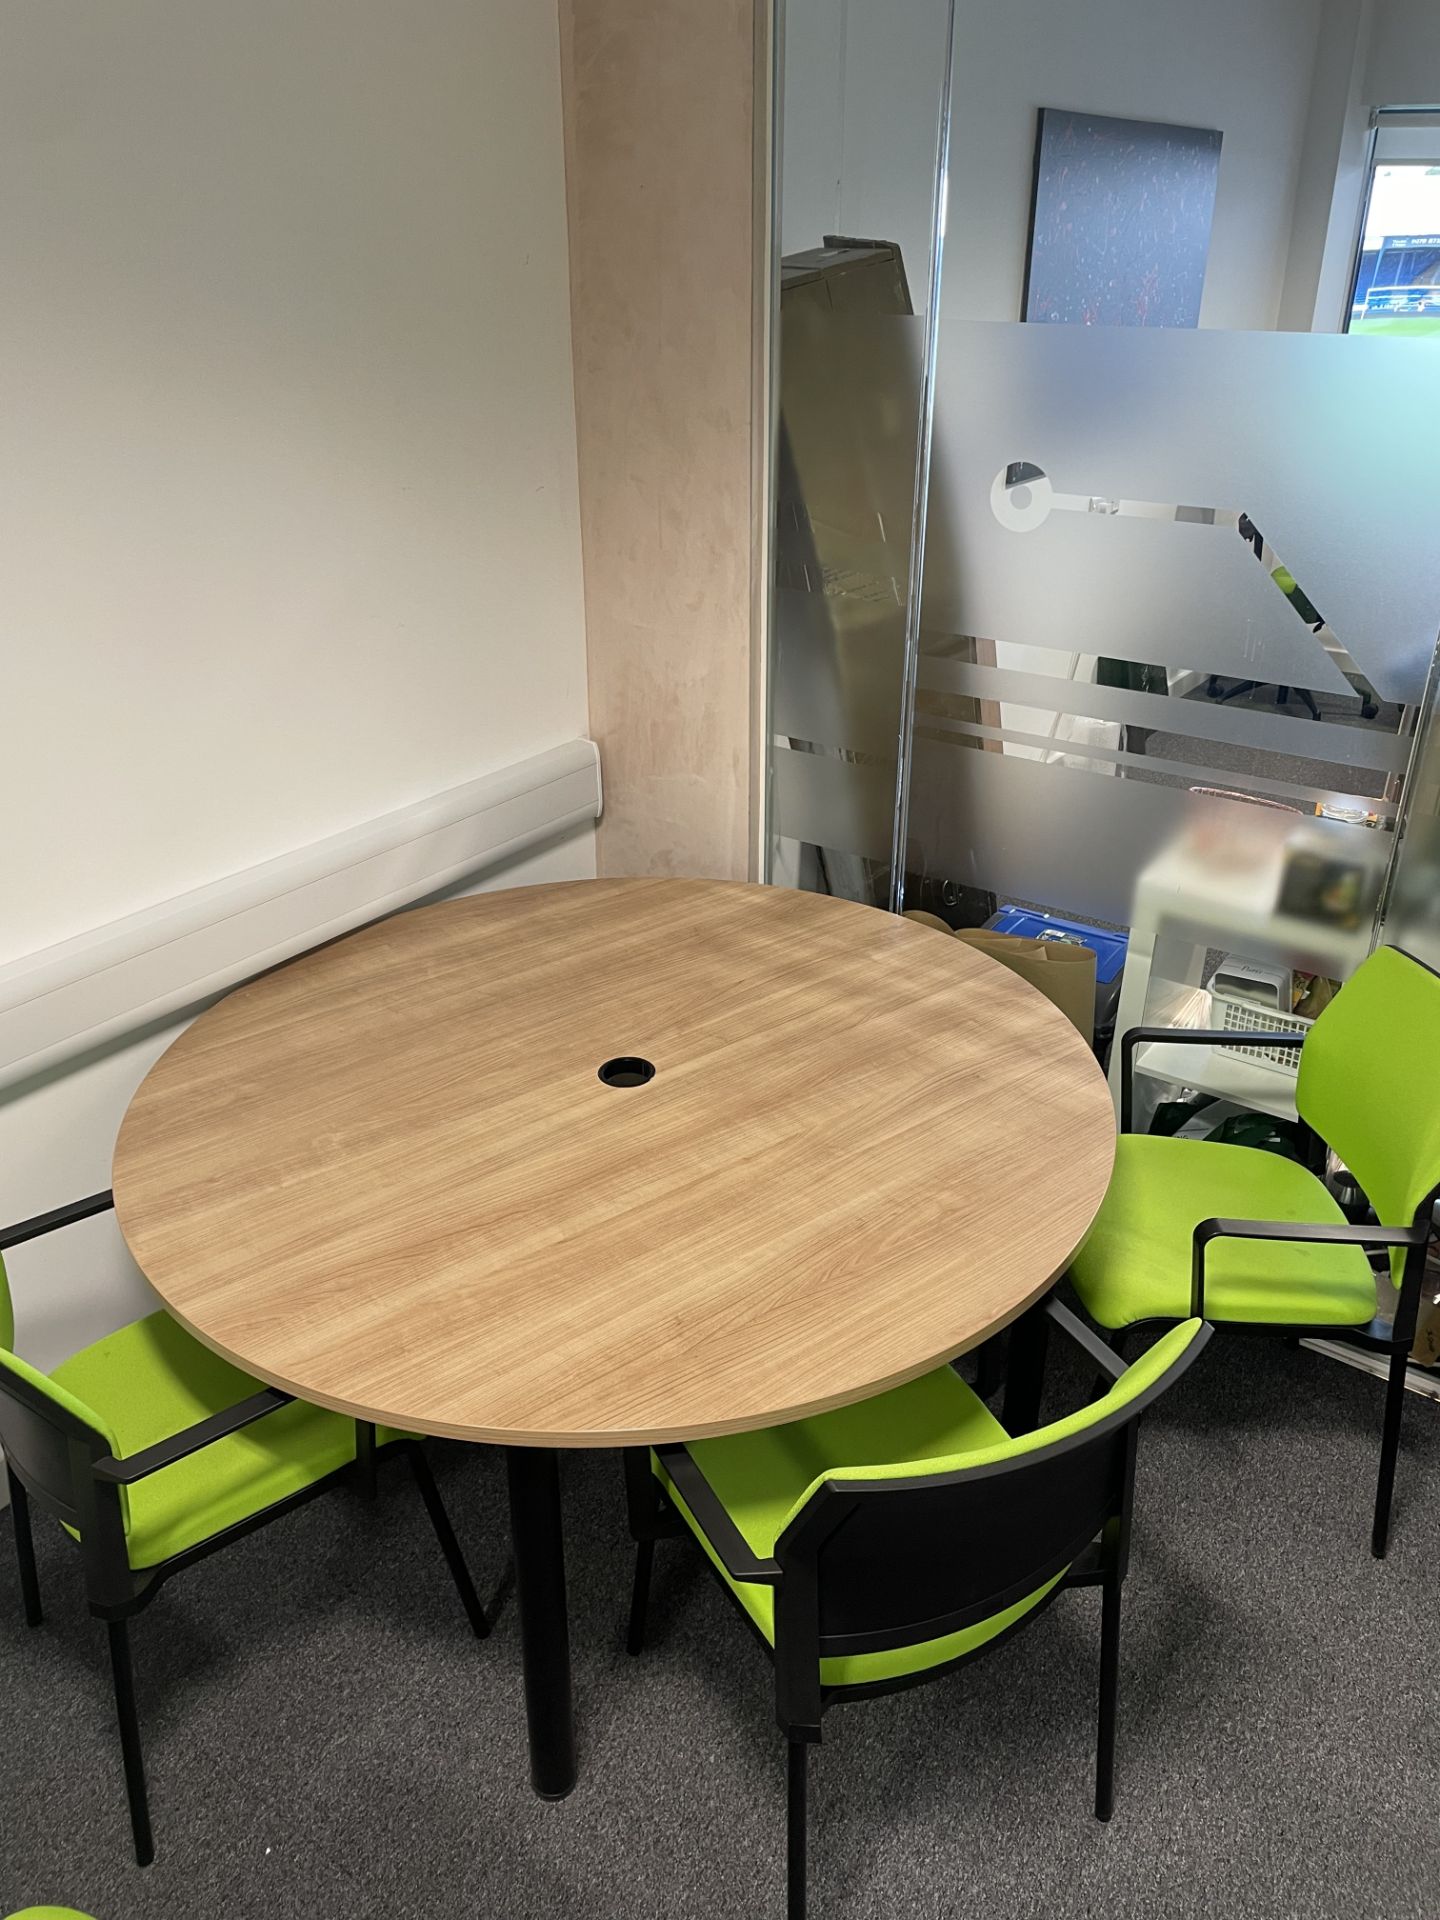 1 x round office table with 5 x green fabric chairs